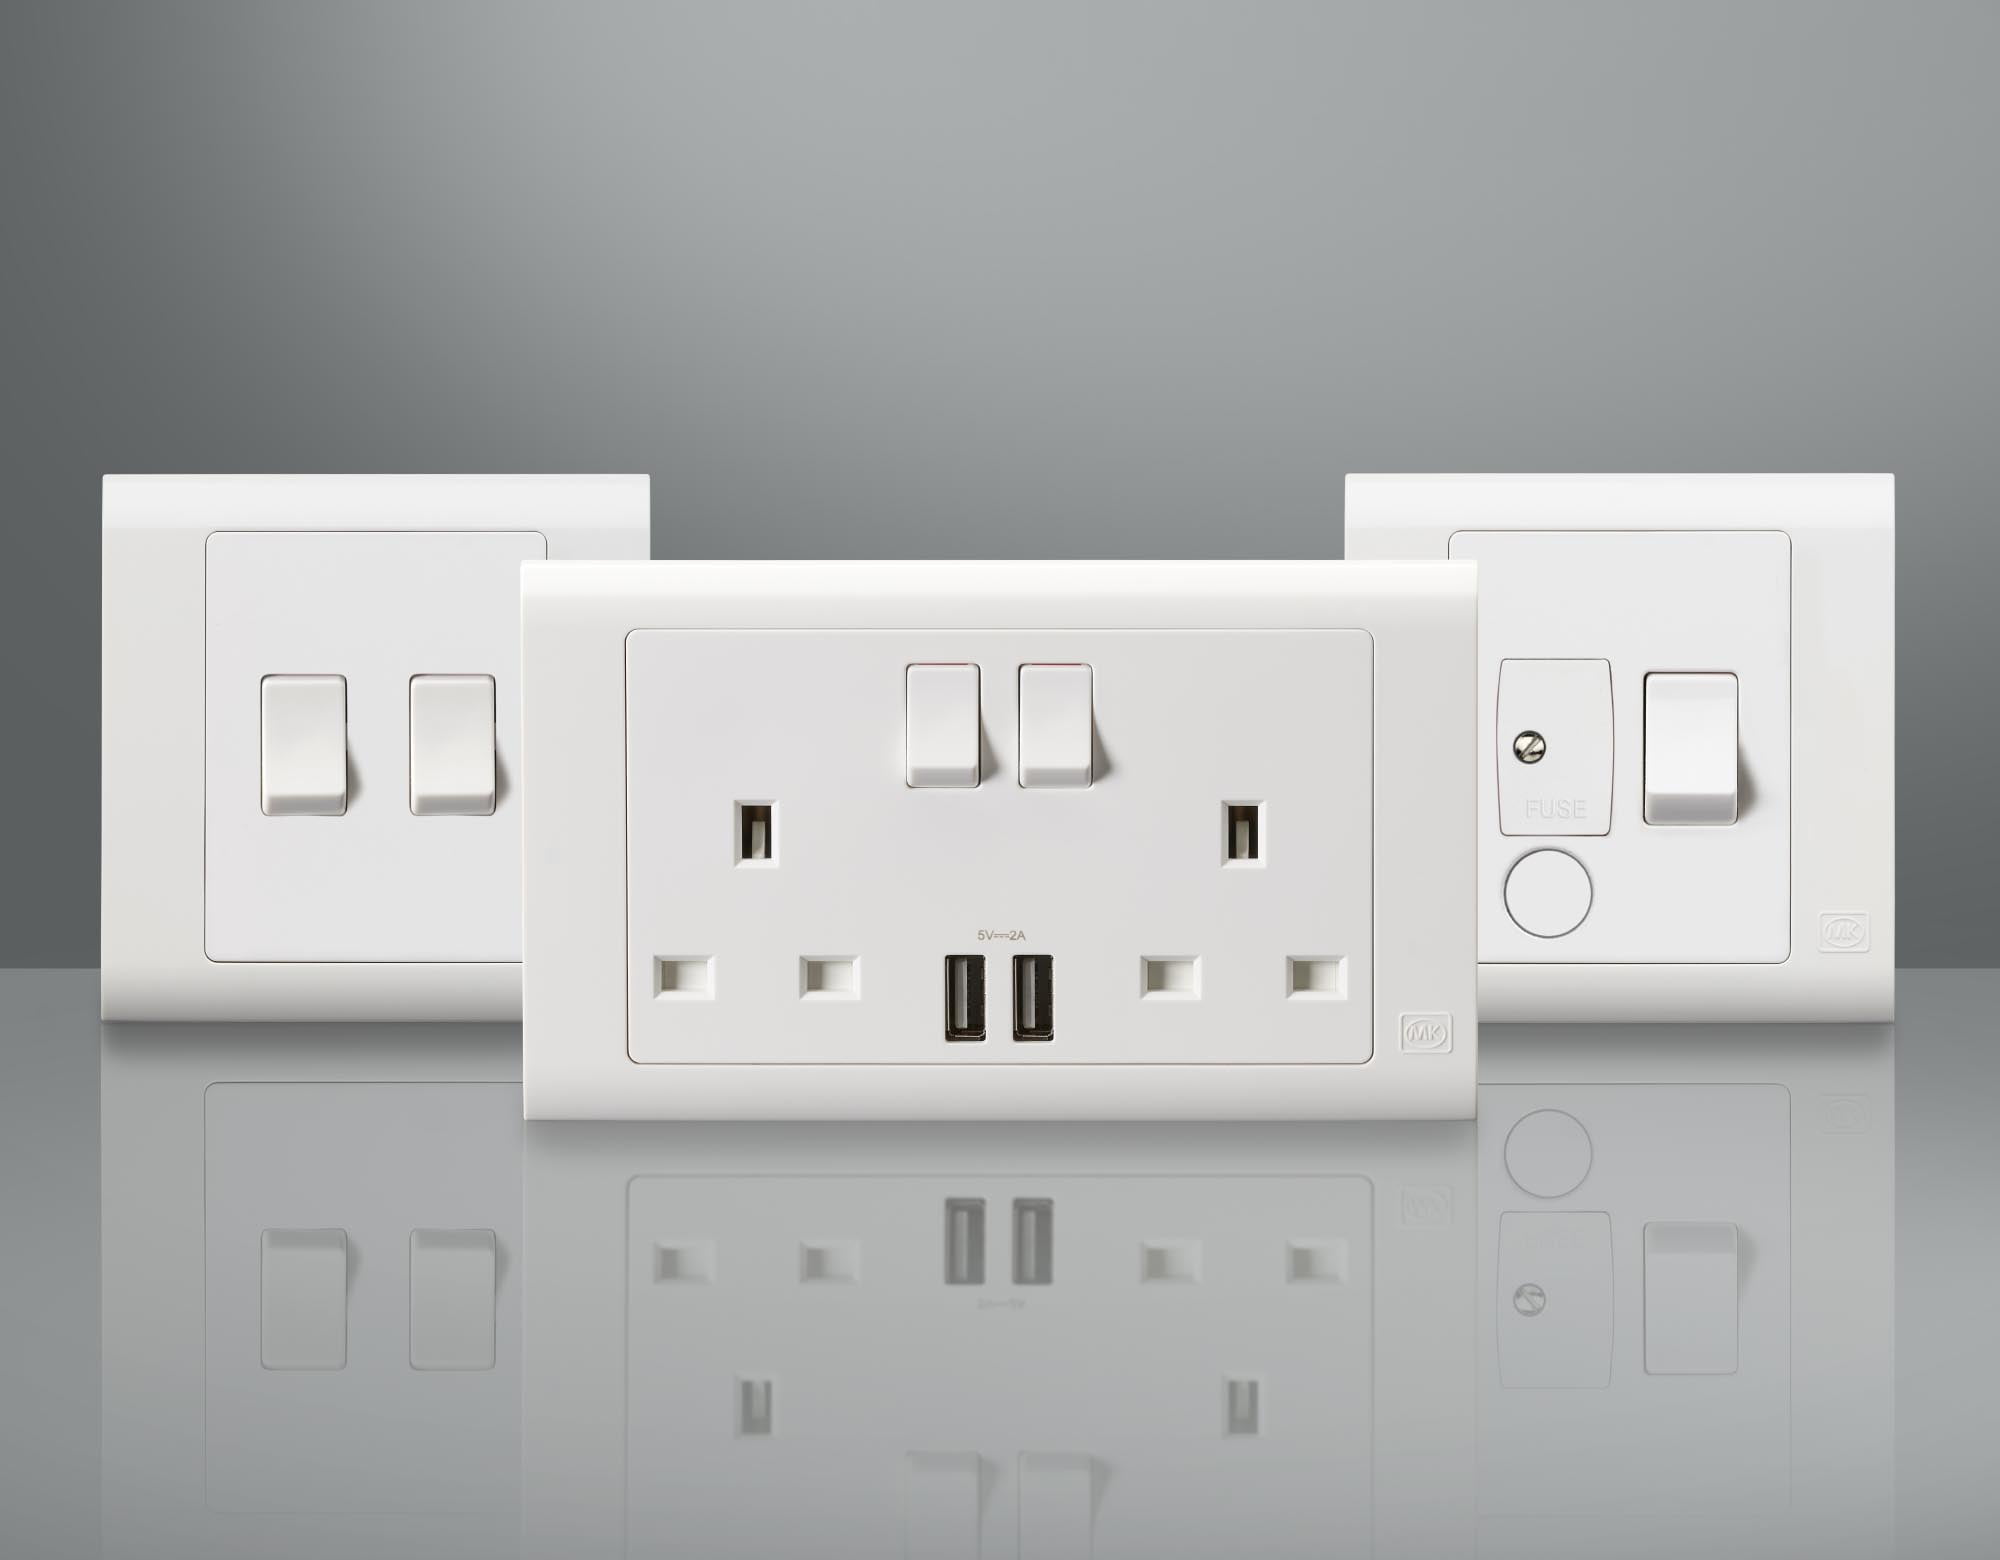 MK ELECTRIC LAUNCHES NEW RANGE DESIGNED 